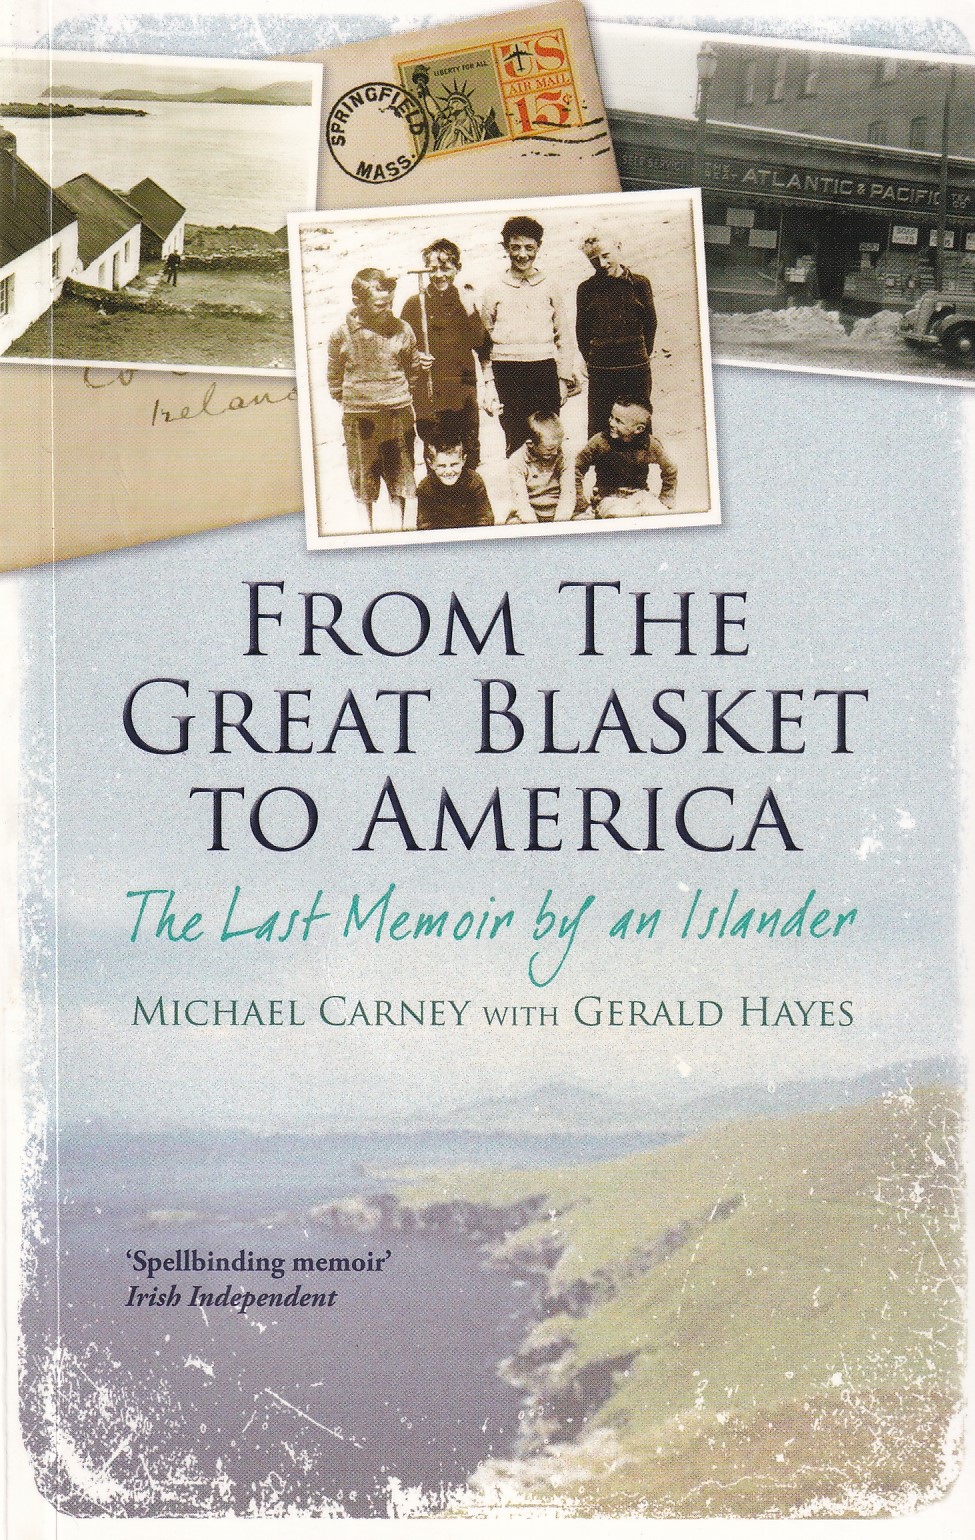 From the Great Blasket to America: The Last Memoir by an Islander | Michael Carney with Gerald Hayes | Charlie Byrne's